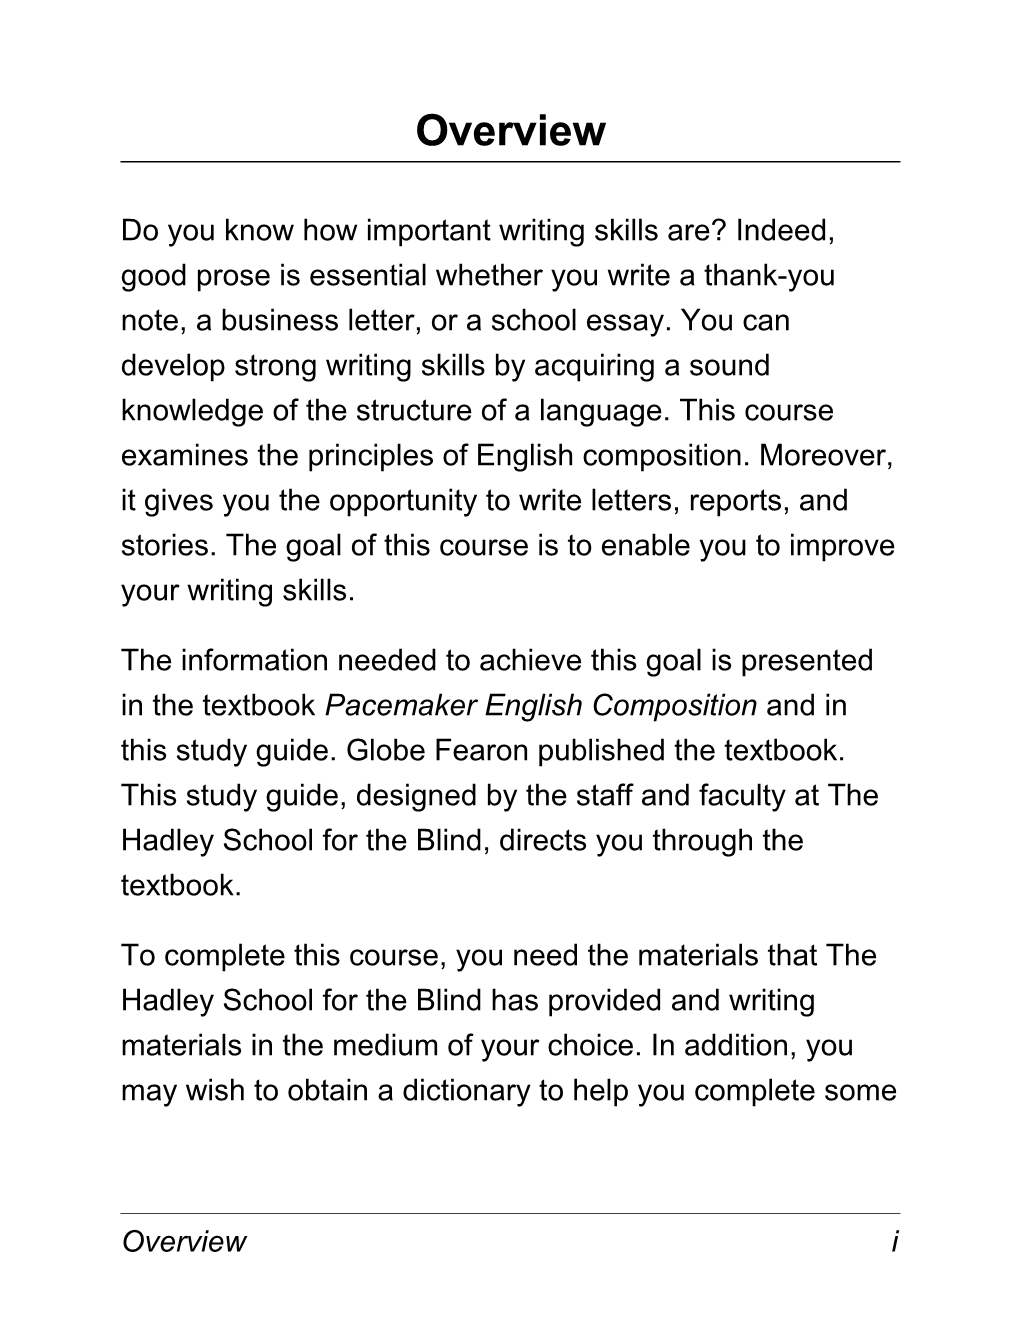 Do You Know How Important Writing Skills Are? Indeed, Good Prose Is Essential Whether You